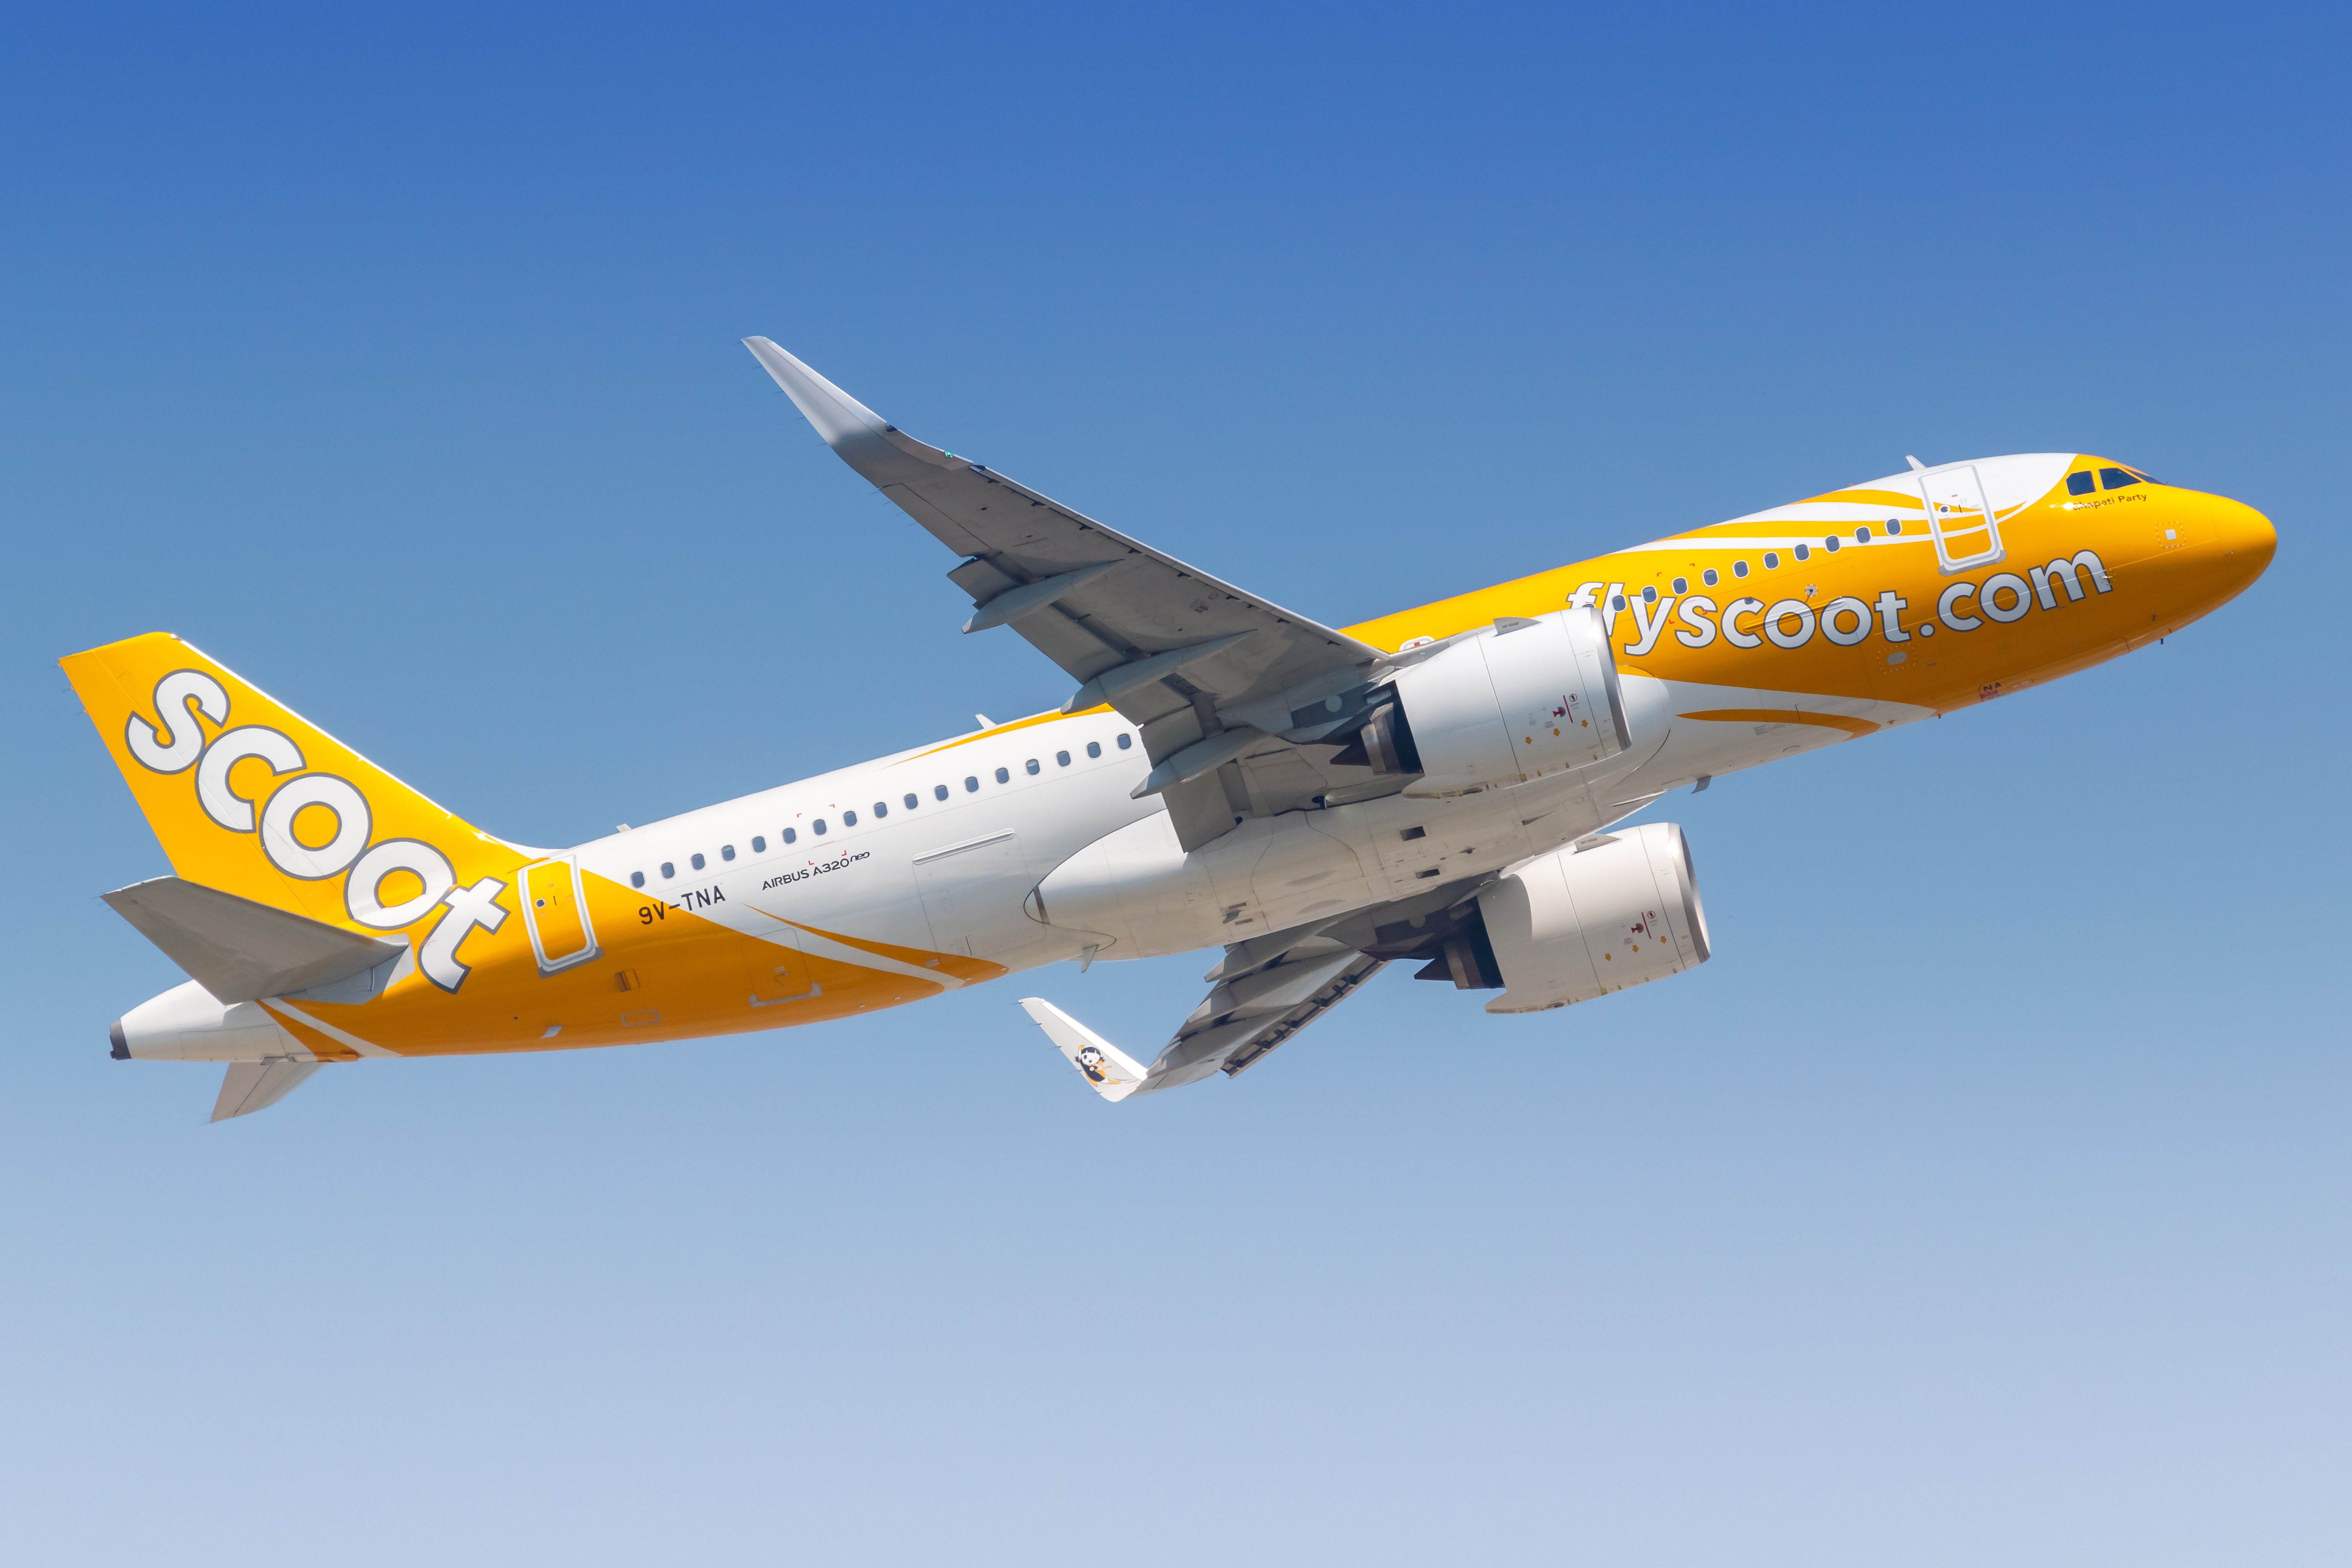 A Scoot Airbus A320neo flying in the sky.